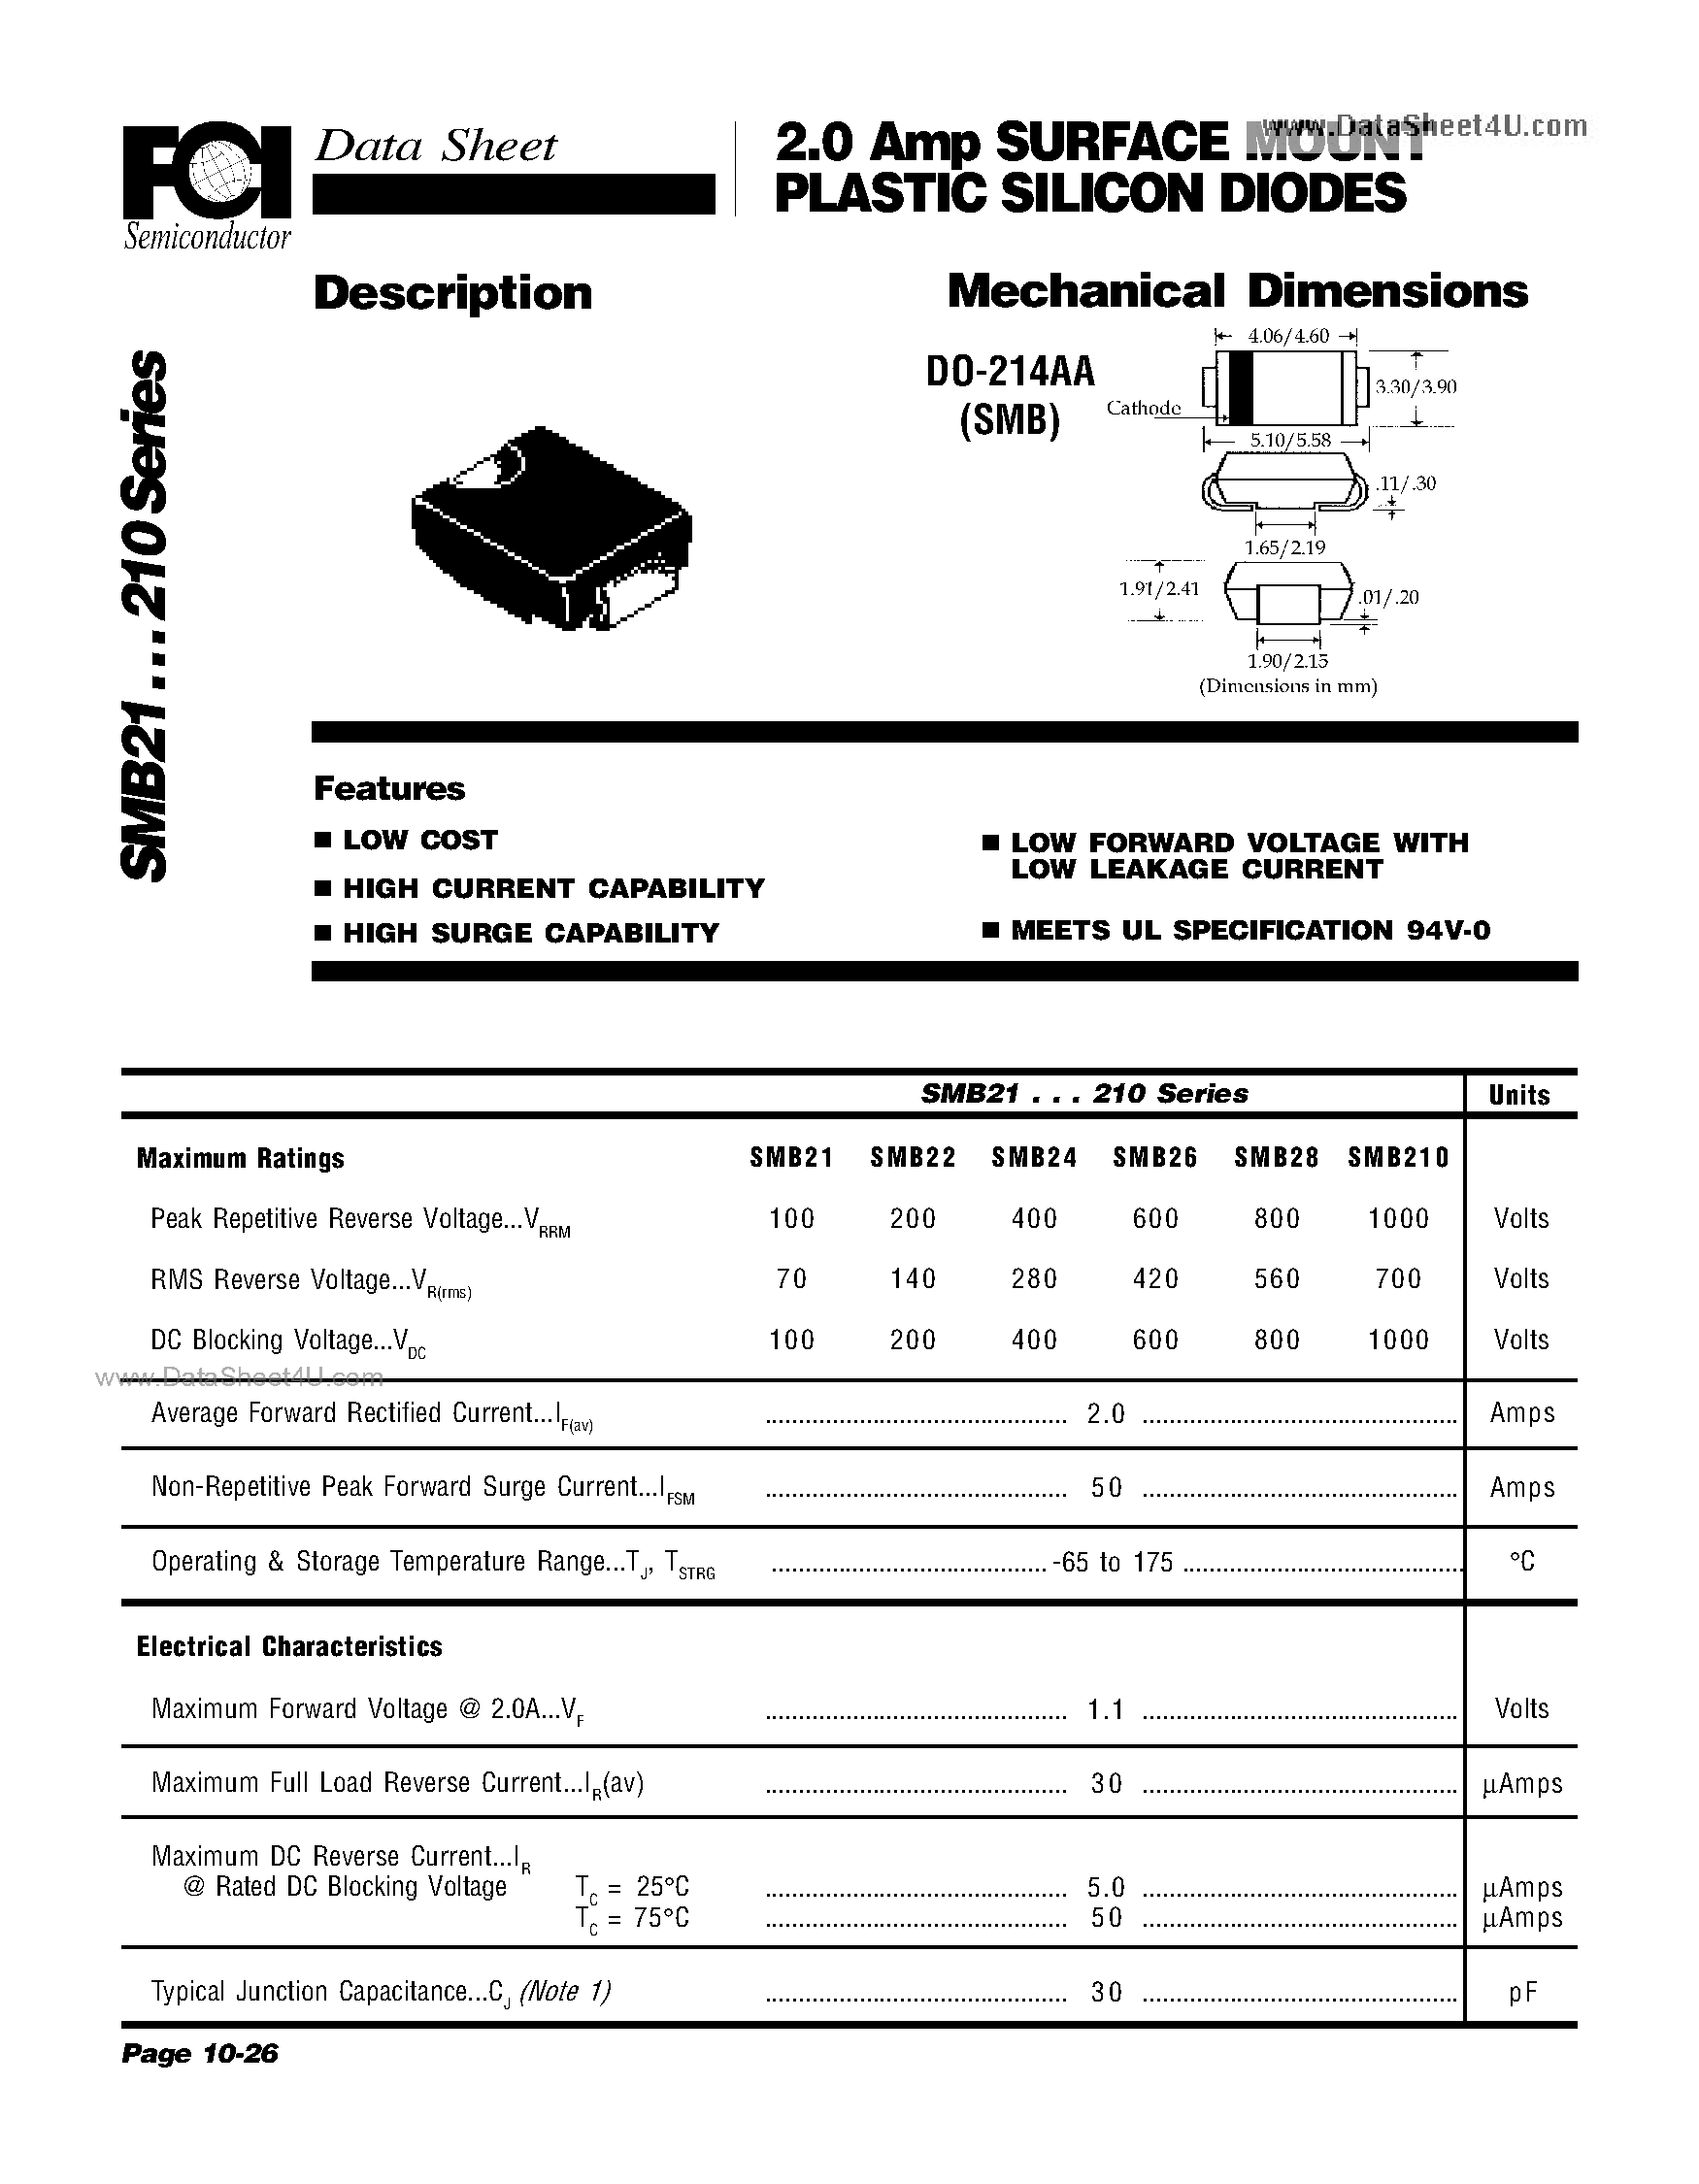 Datasheet SMB21 - (SMB21 - SMB210) 2.0 Amp SURFACE MOUNT PLASTIC SILICON DIODES Mechanical Dimensions page 1